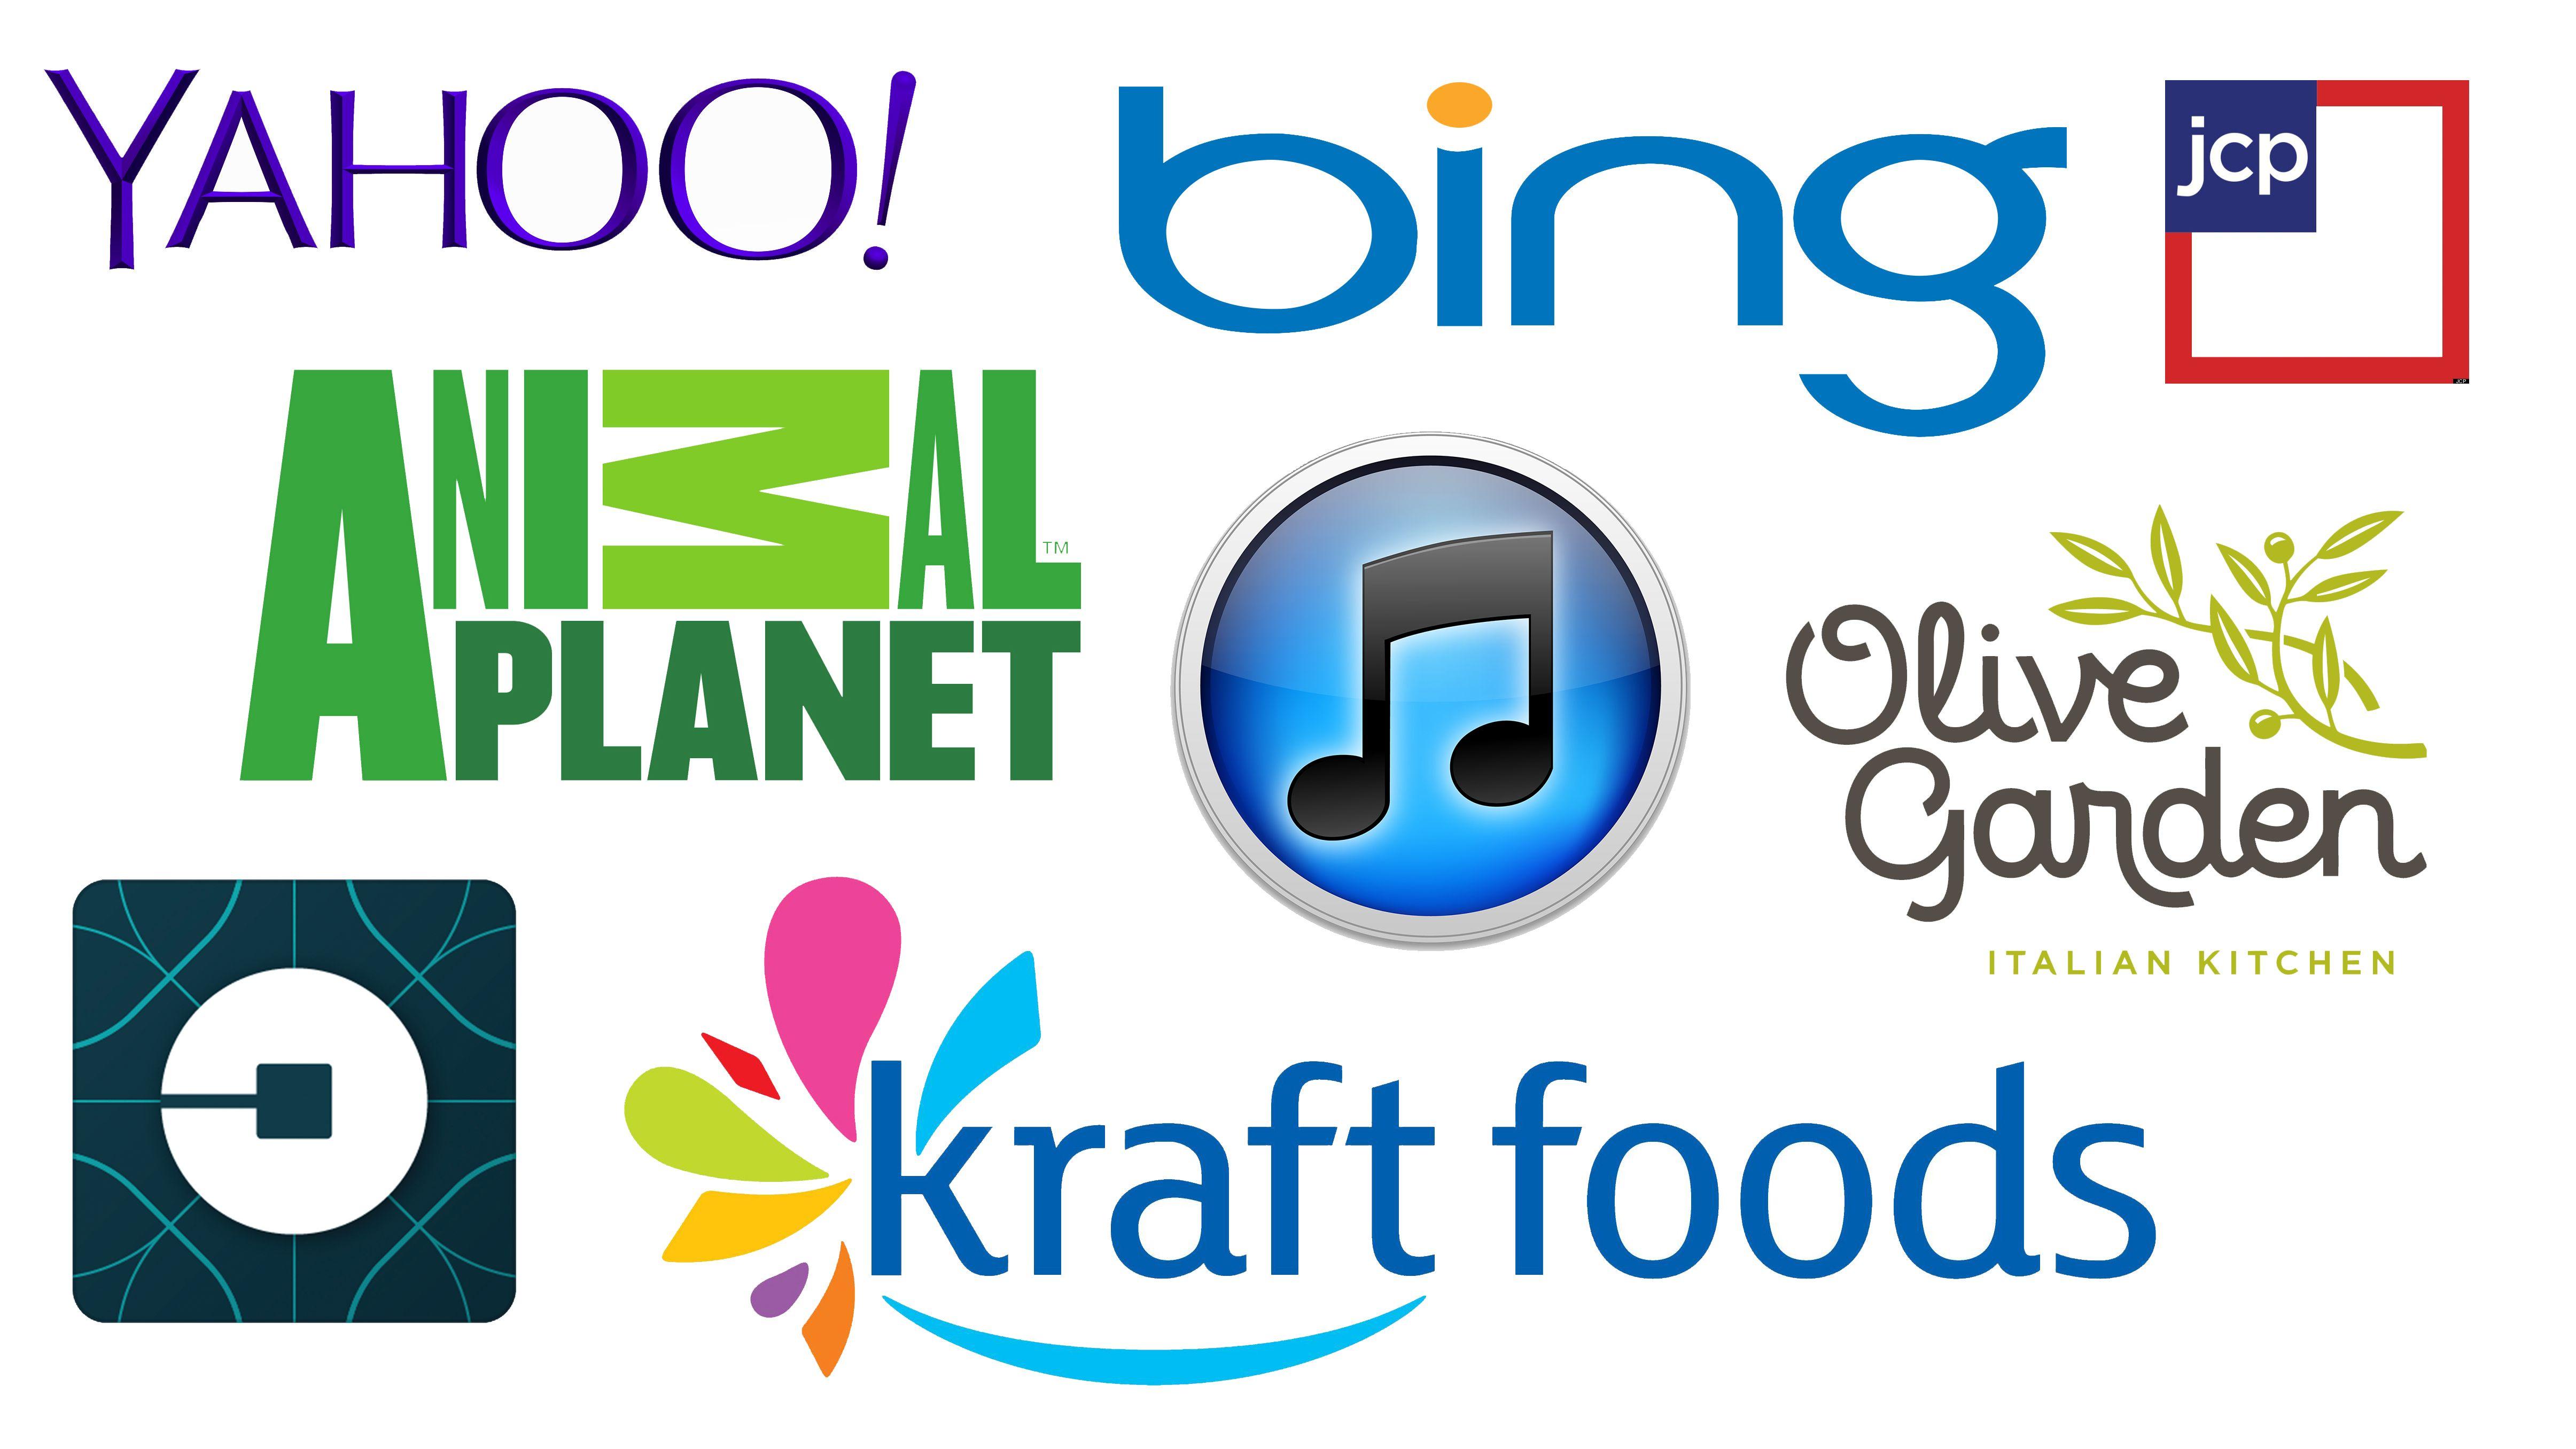 Bing Current Logo - 7 logos we all love to hate (and lessons we can learn) | Creative Bloq